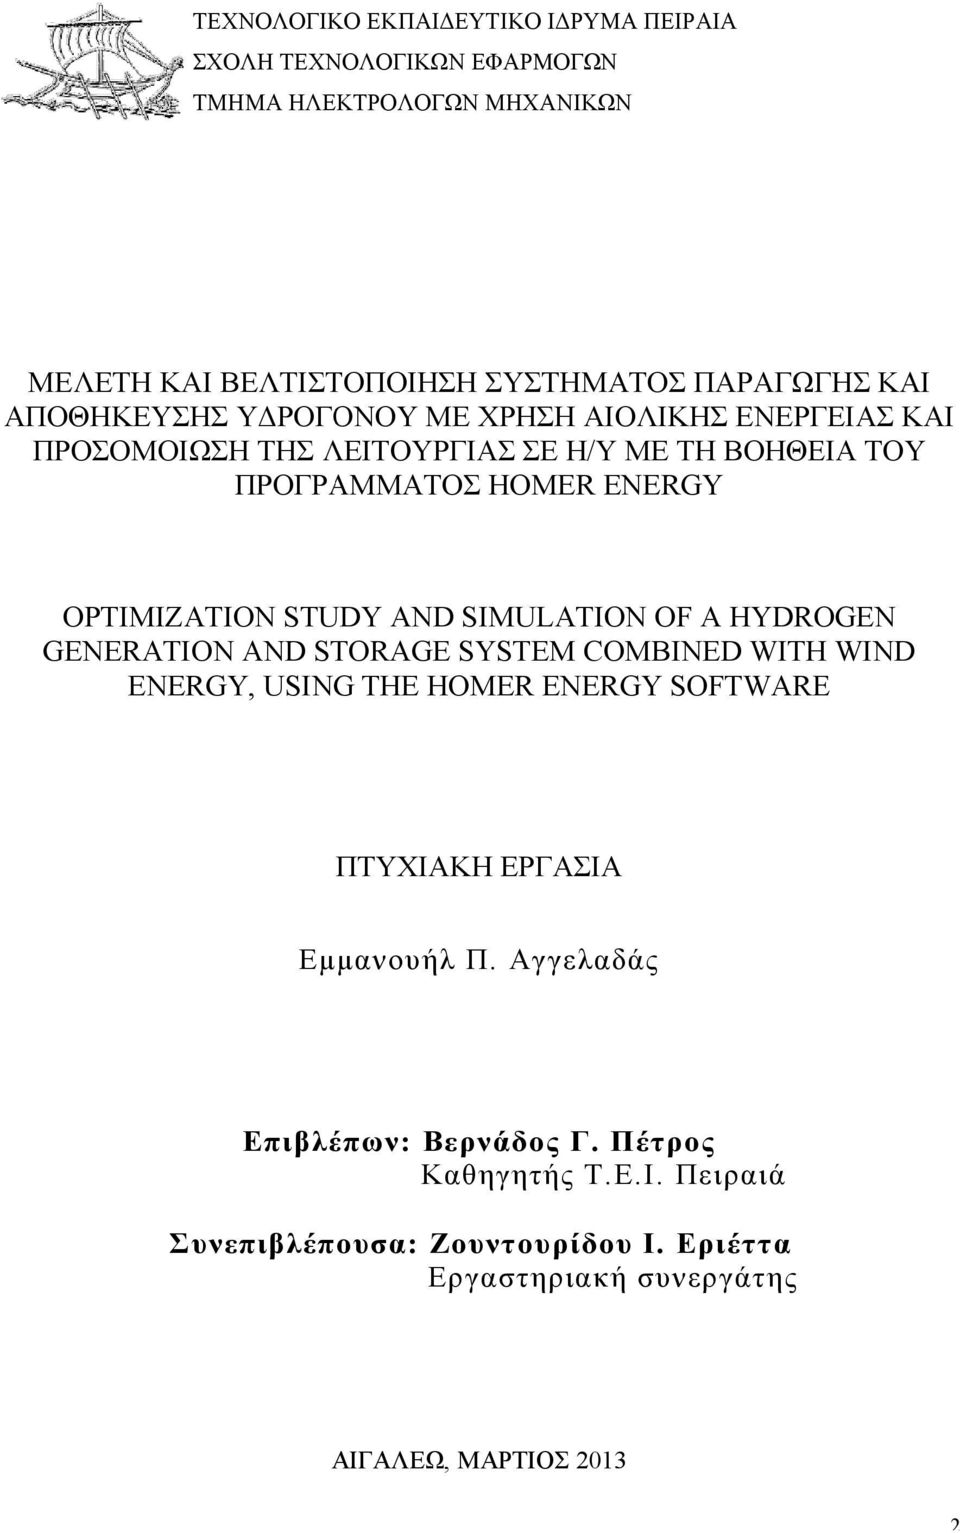 STUDY AND SIMULATION OF A HYDROGEN GENERATION AND STORAGE SYSTEM COMBINED WITH WIND ENERGY, USING THE HOMER ENERGY SOFTWARE ΠΤΥΧΙΑΚΗ ΕΡΓΑΣΙΑ Εµµανουήλ